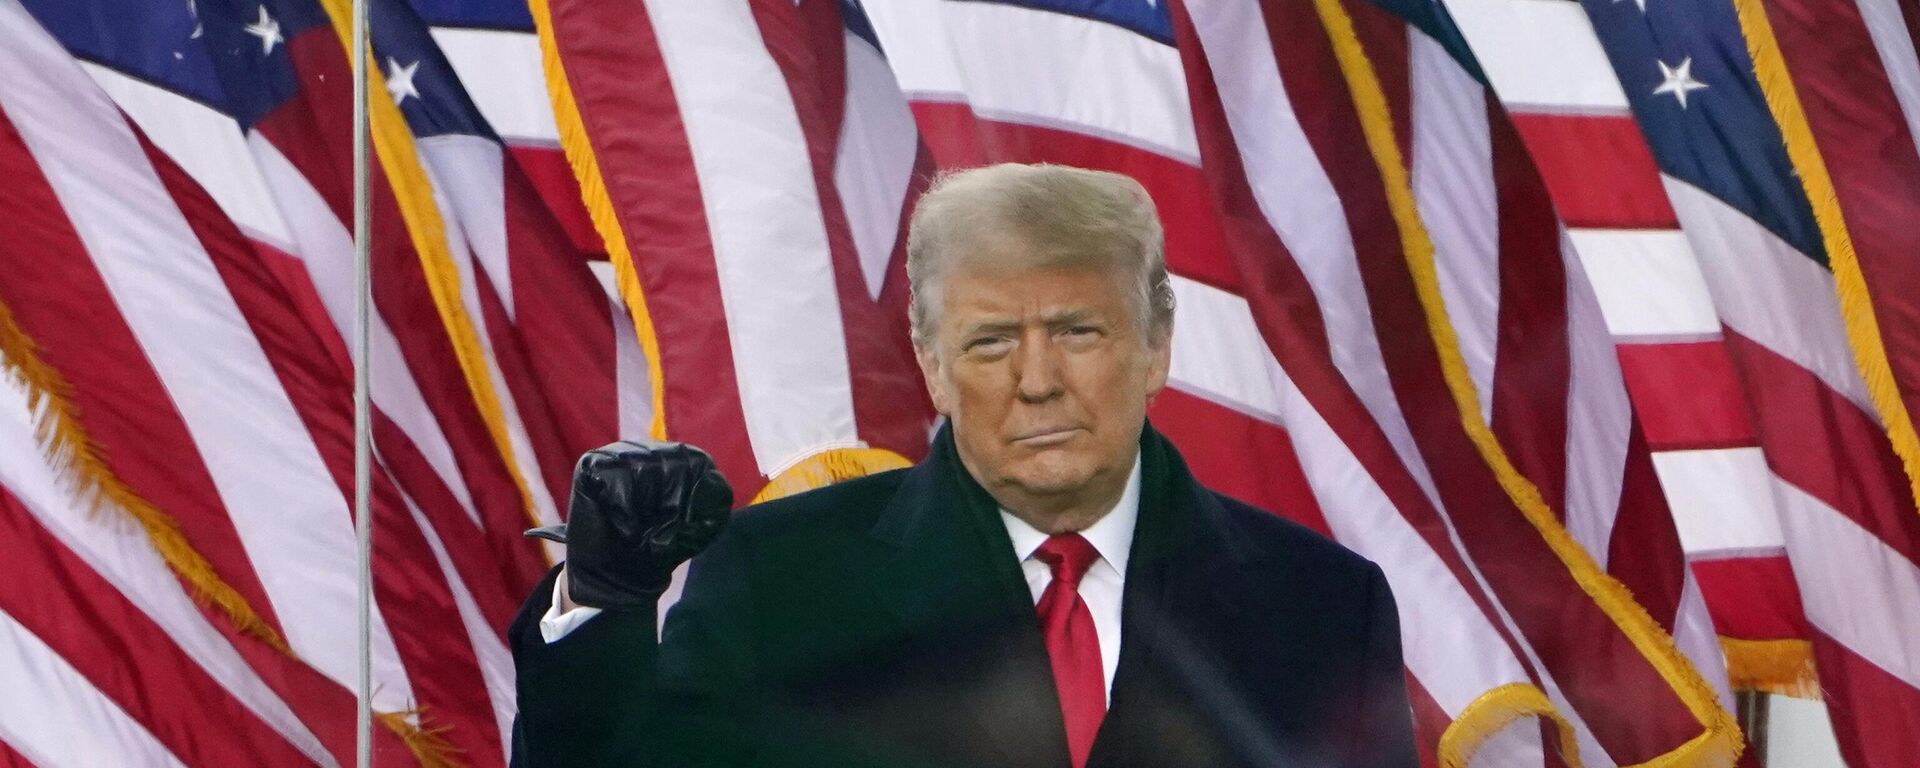 Then-President Donald Trump gestures as he arrives to speak at a rally in Washington, on Jan. 6, 2021.  - Sputnik International, 1920, 14.04.2022